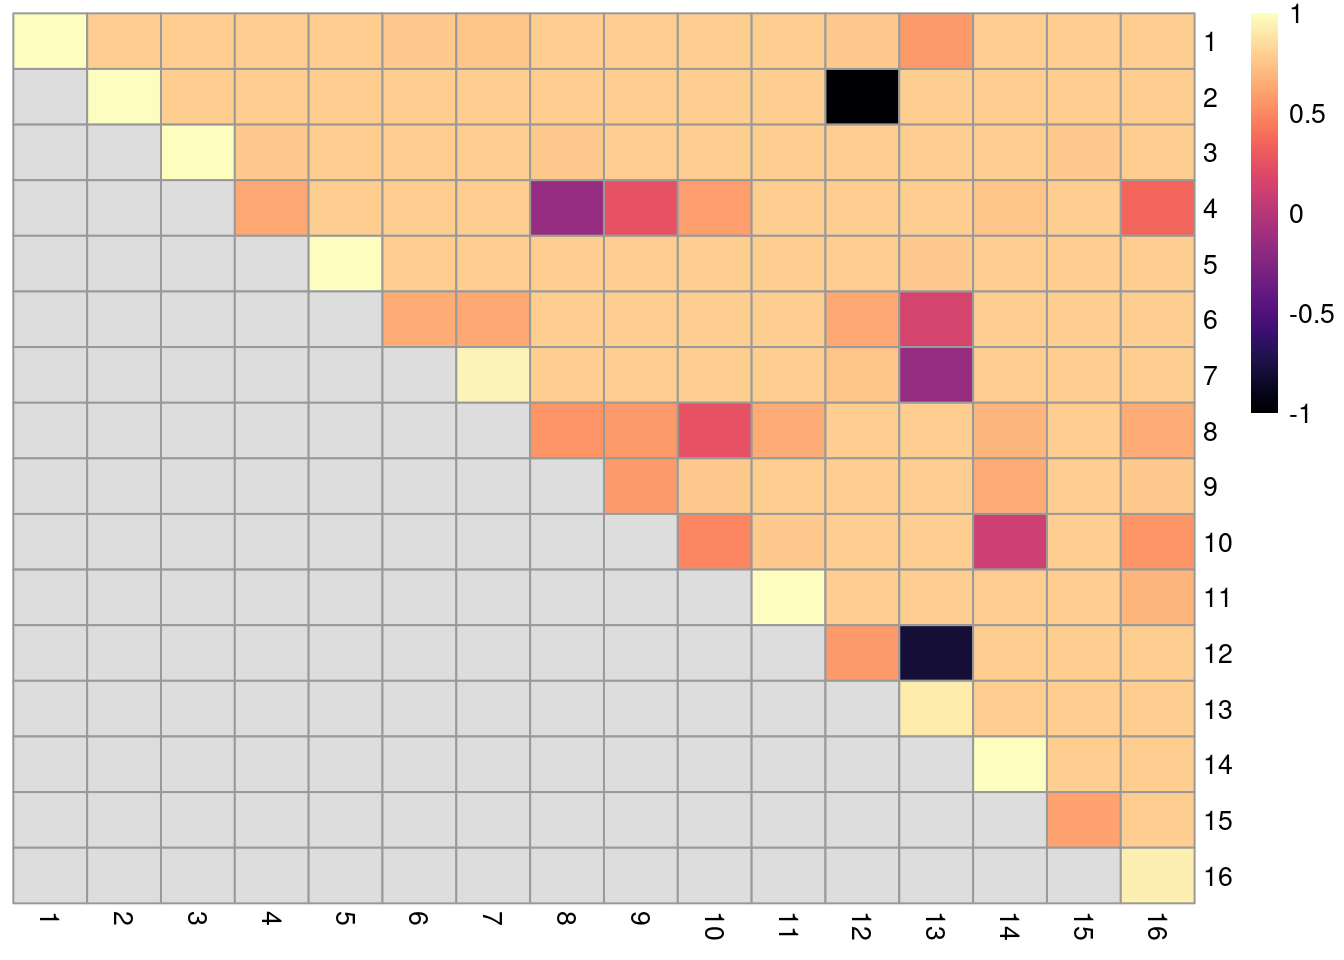 Heatmap of ARI-derived ratios from bootstrapping of graph-based clustering in the PBMC dataset. Each row and column represents an original cluster and each entry is colored according to the value of the ARI ratio between that pair of clusters.